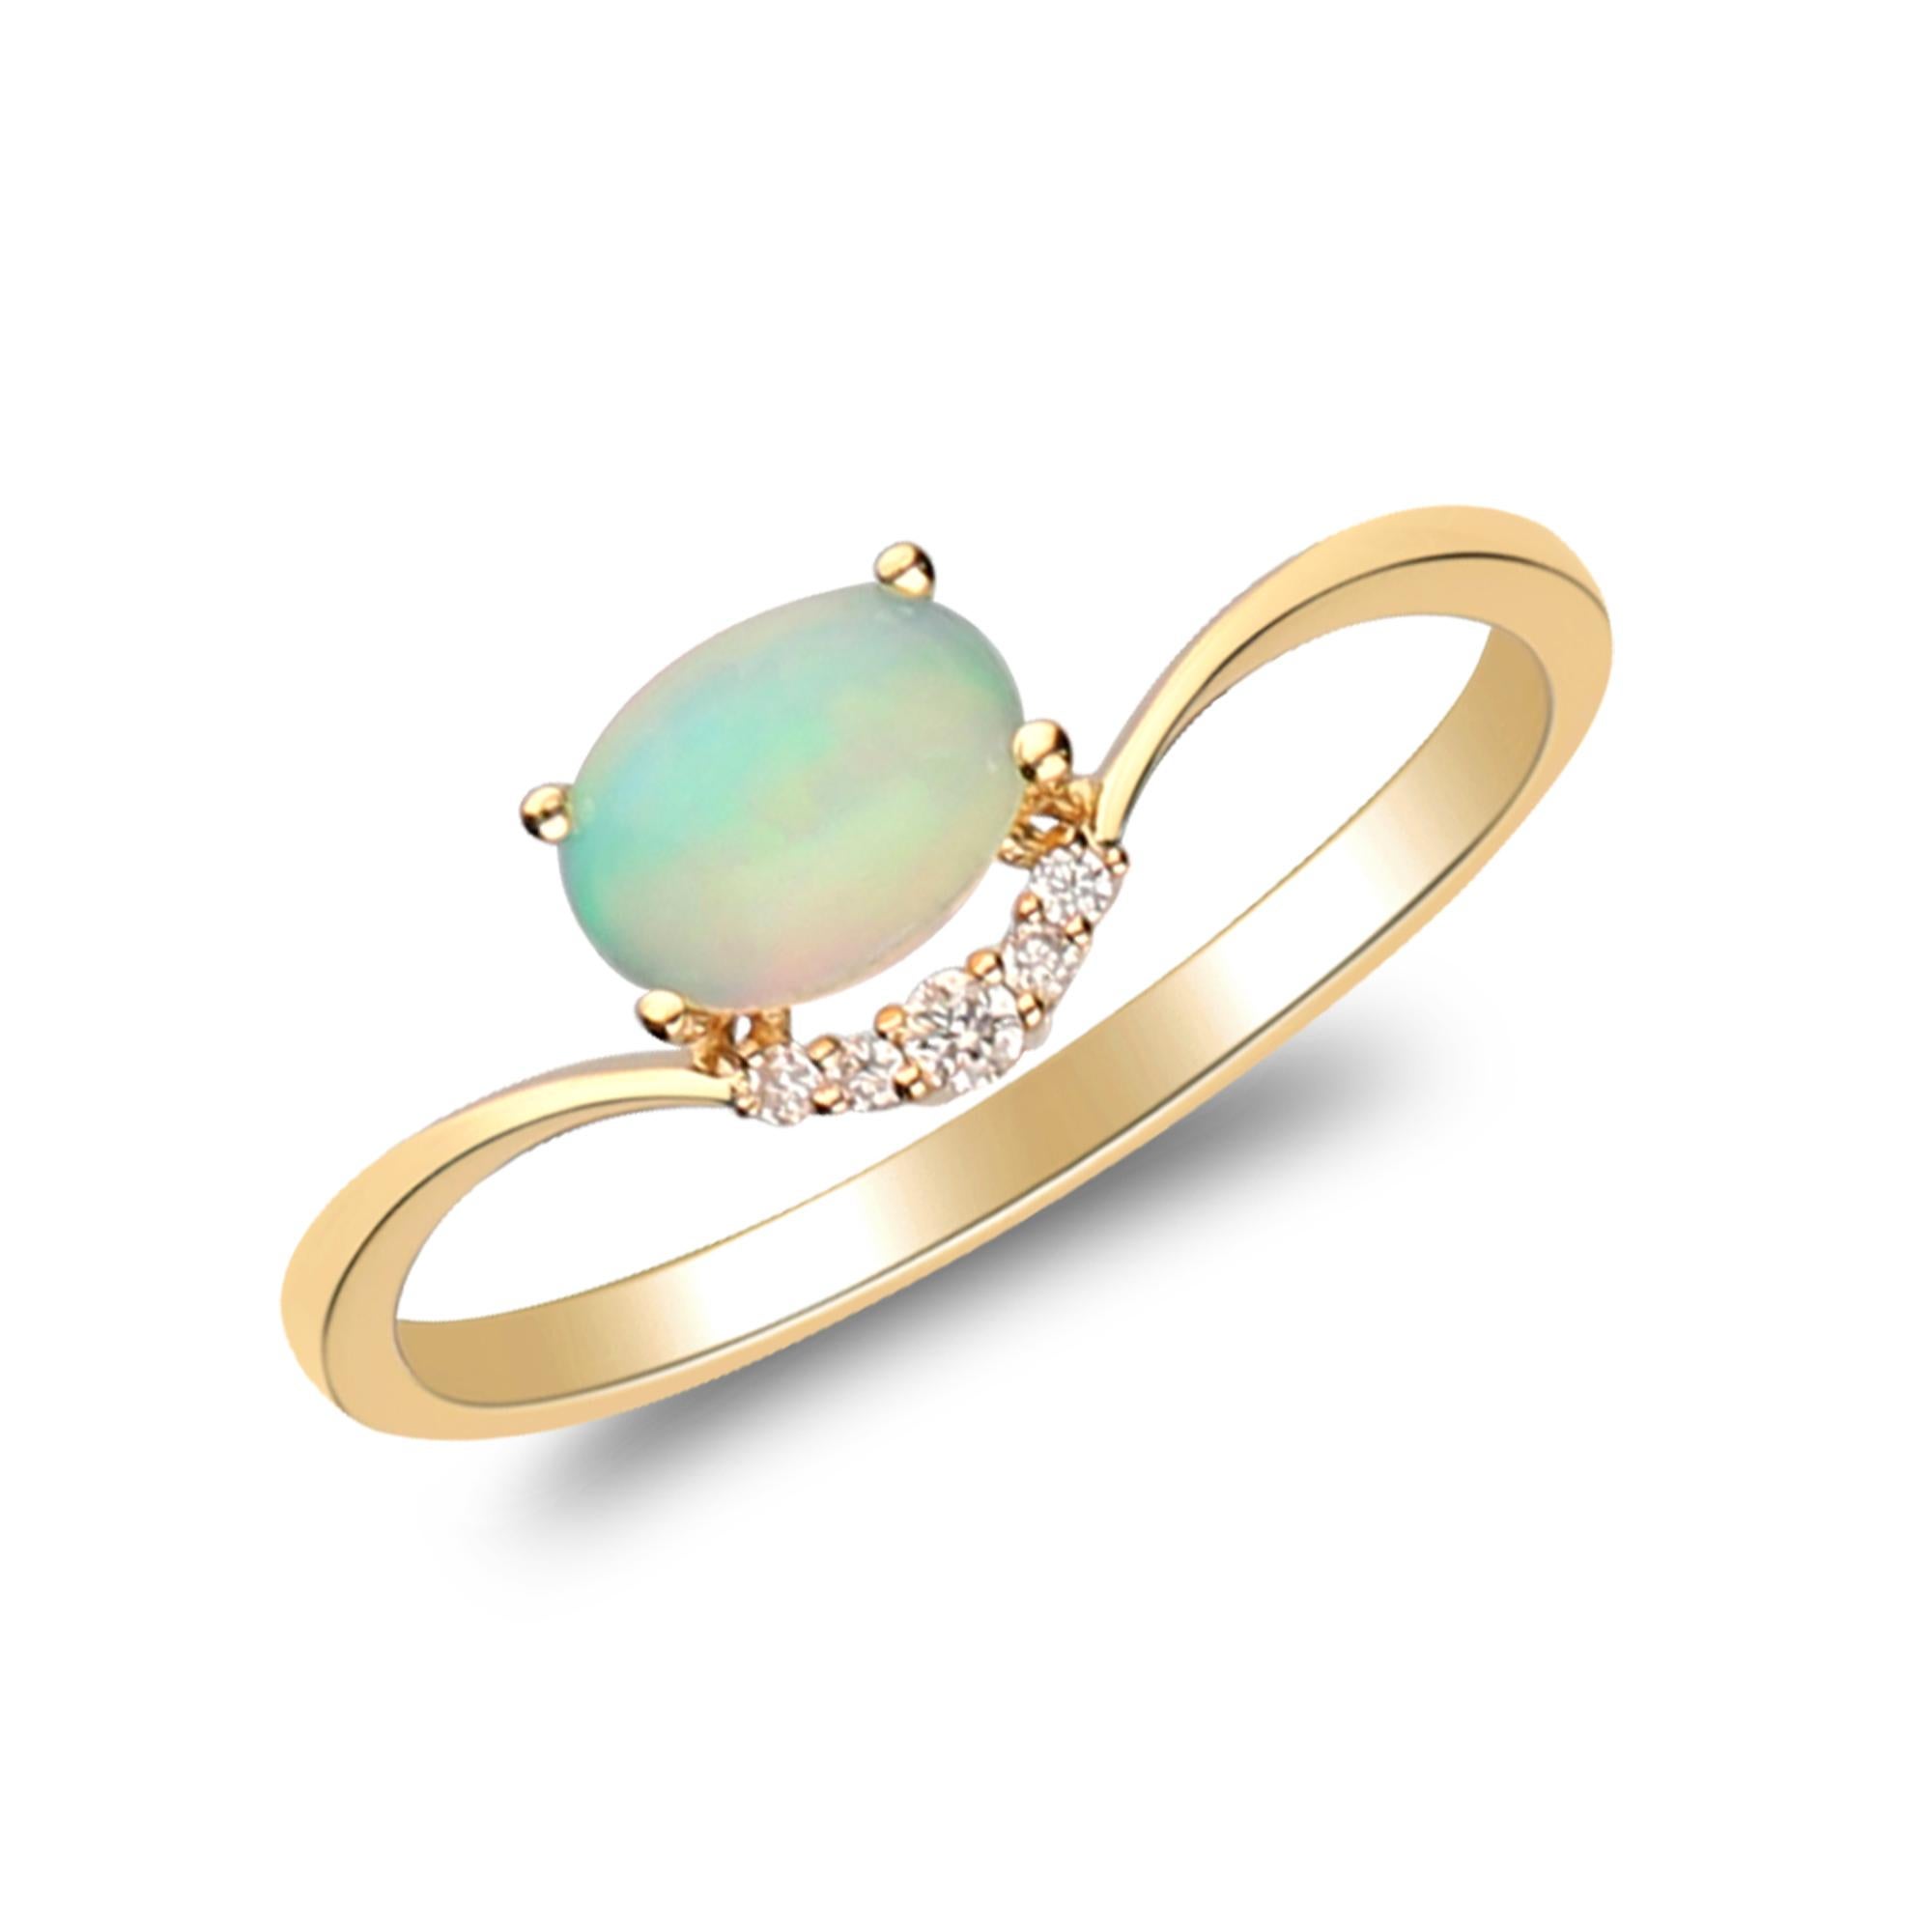 Women's 0.65 Carat Oval Cab Ethiopian Opal Diamond accents 14K Yellow Gold Ring. For Sale